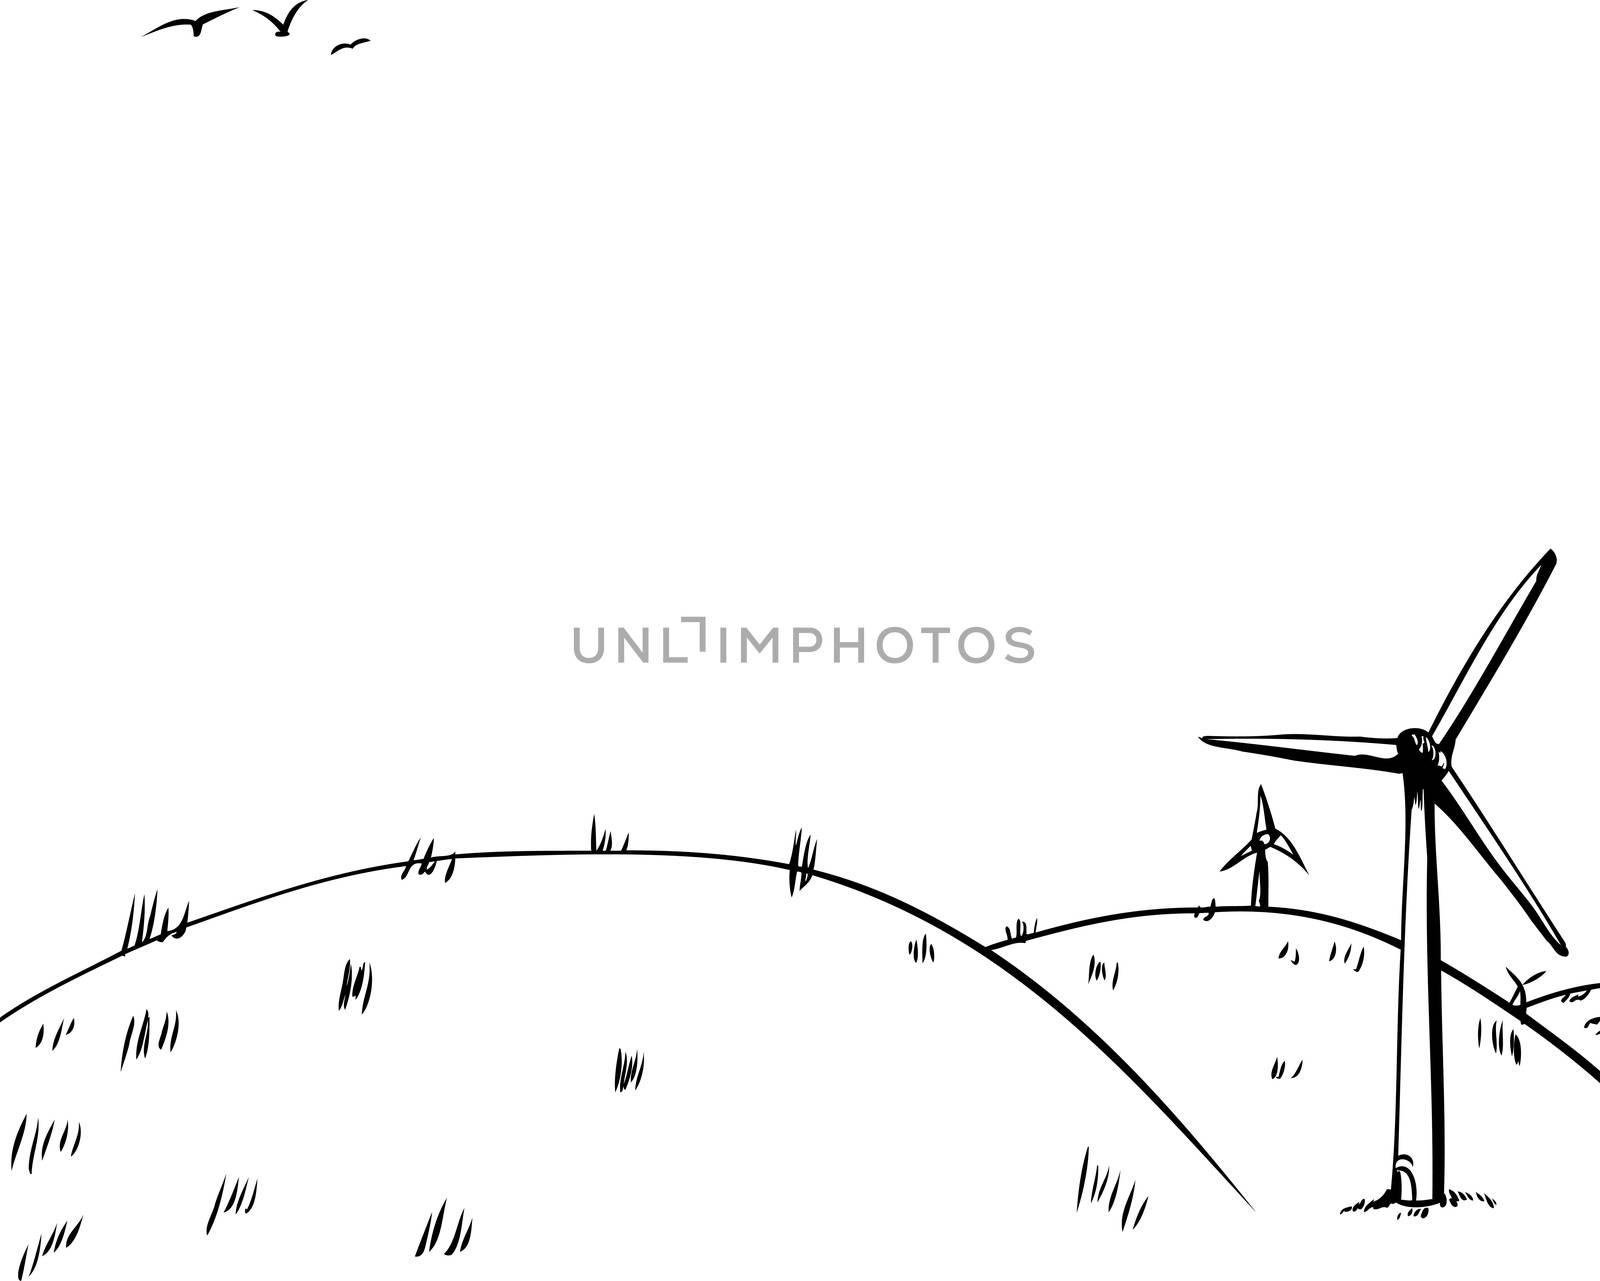 Cartoon background of three wind turbines on side of rolling hills with birds in background